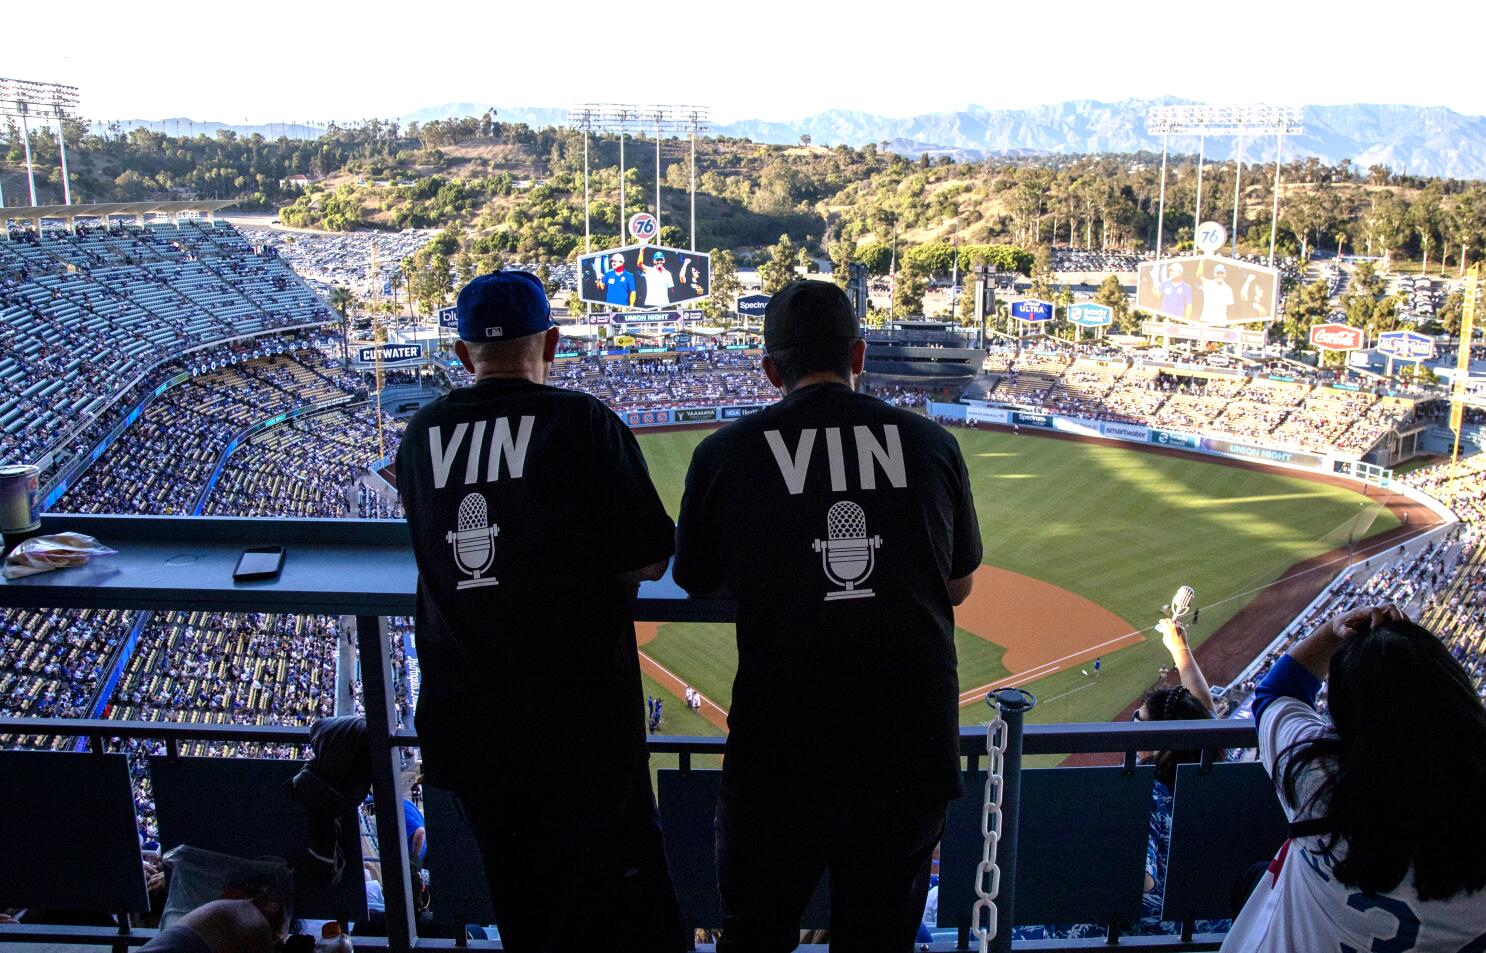 Dodger Stadium is my home': Fans share emotions about Opening Day